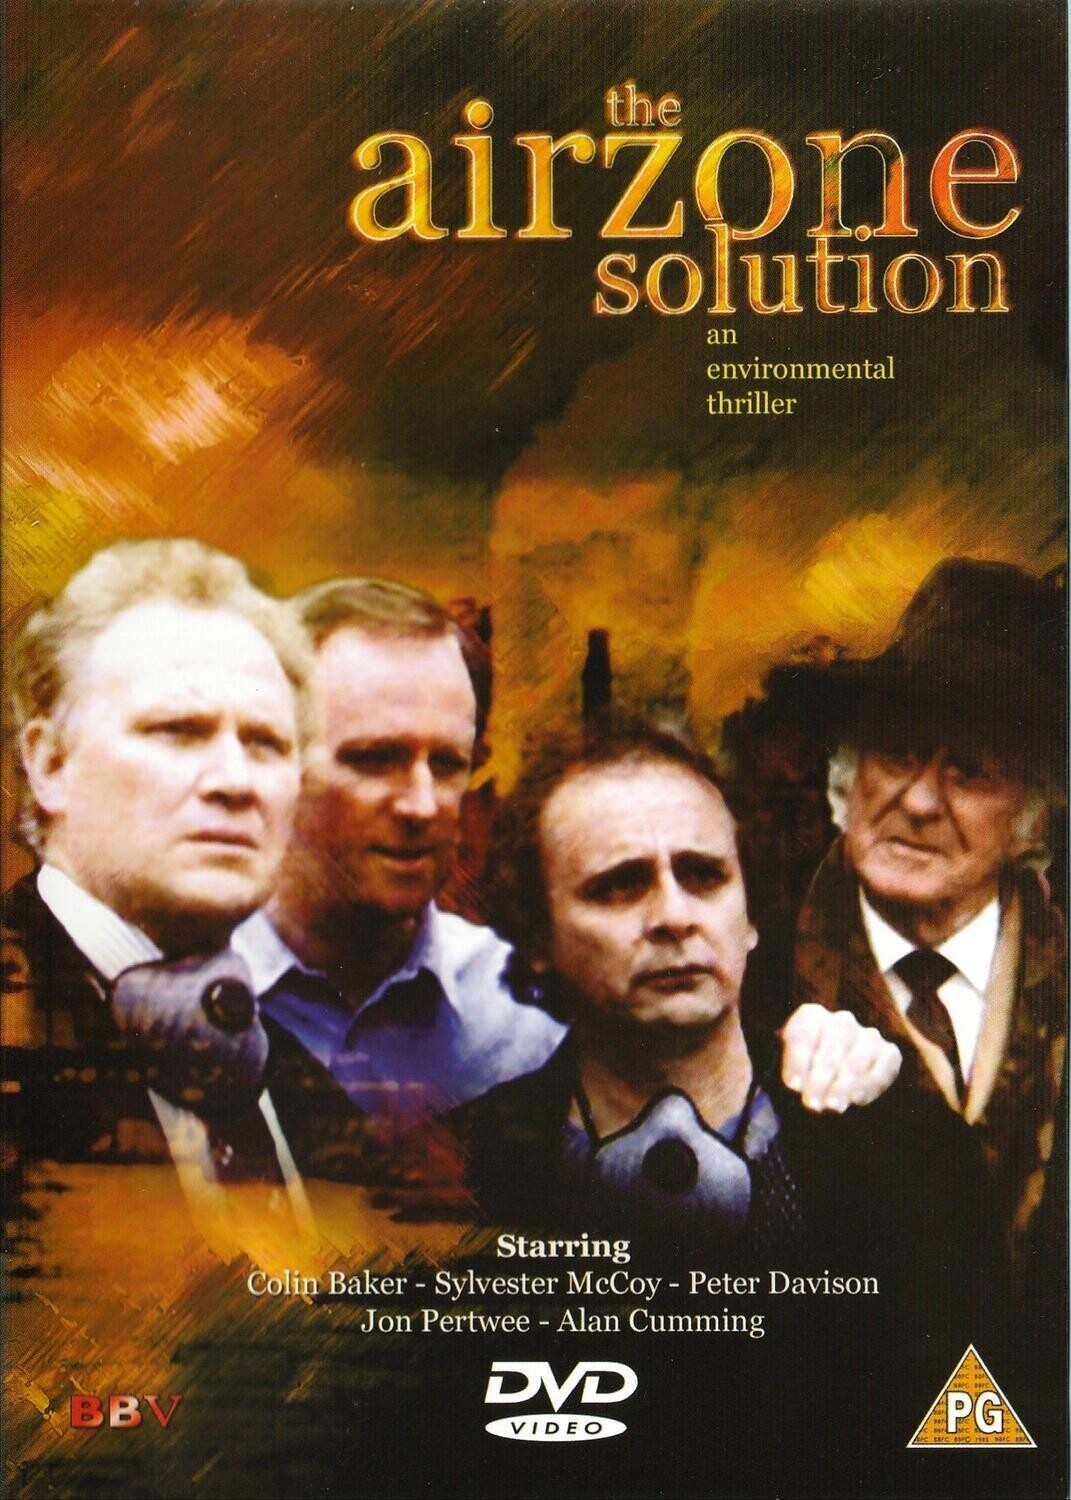 The Airzone Solution (DVD)